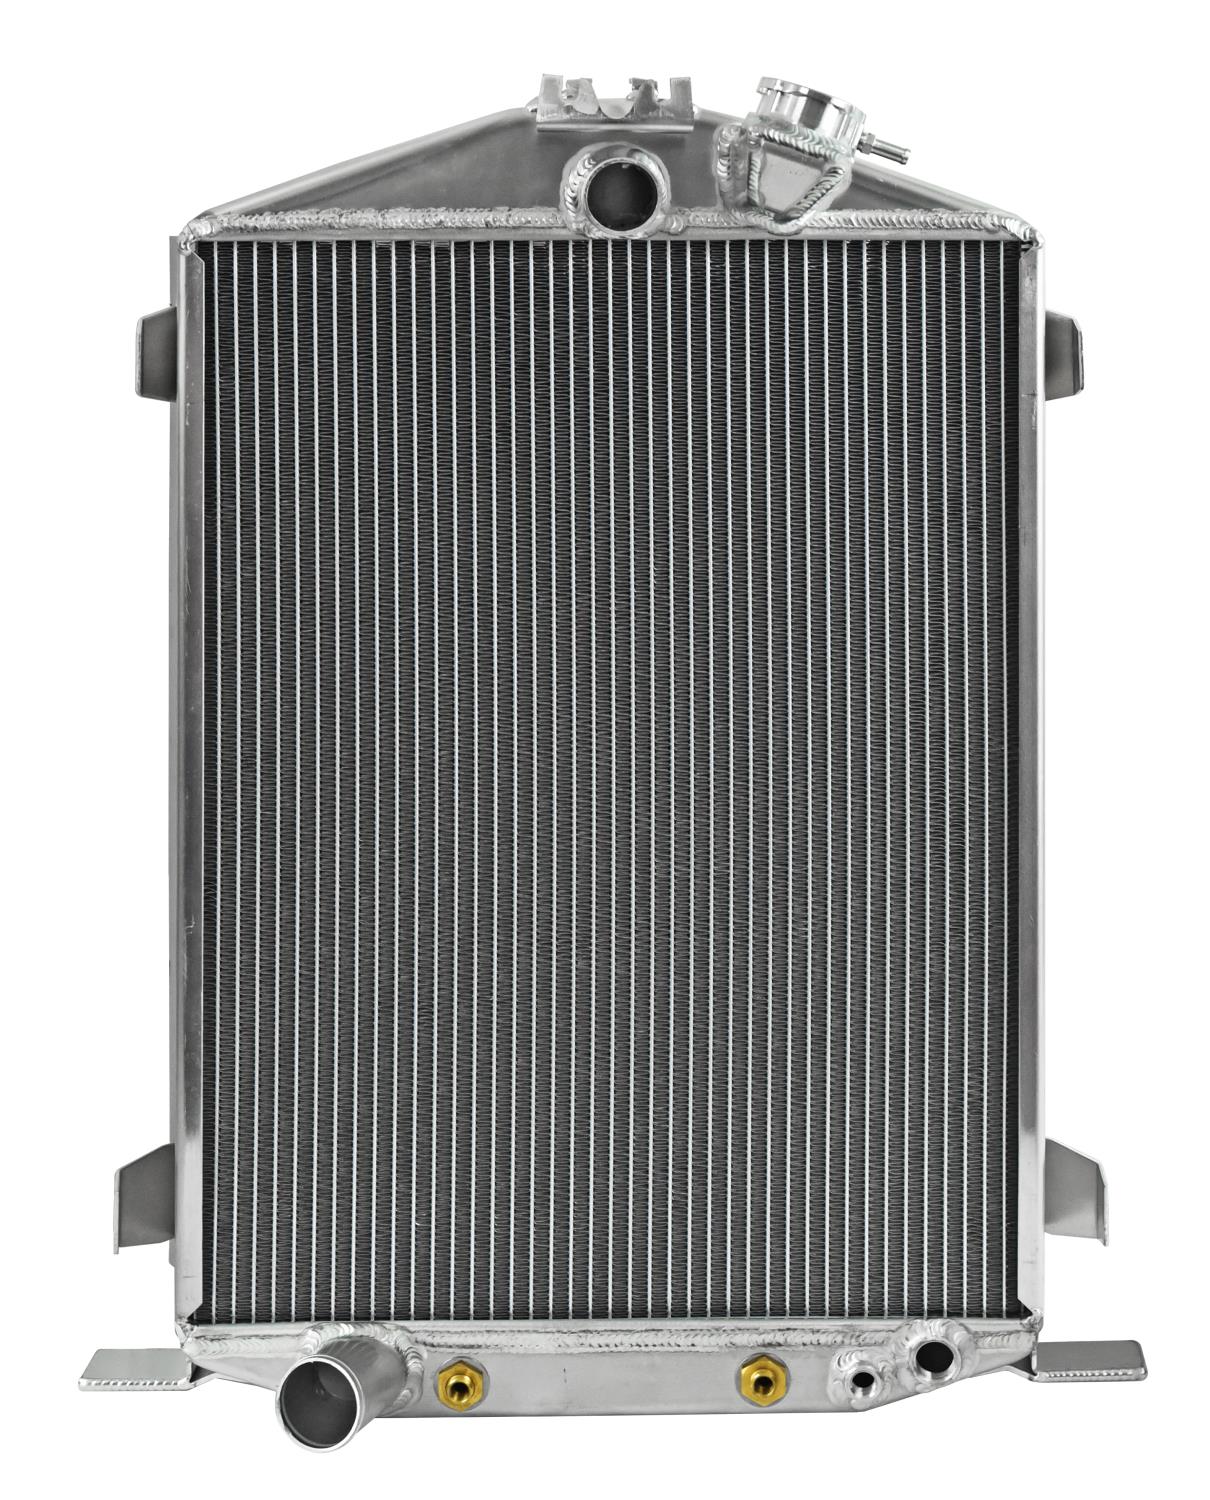 Aluminum Radiator for 1932 Ford HI-BOY with Ford V8 Engine and Full-Height Grill